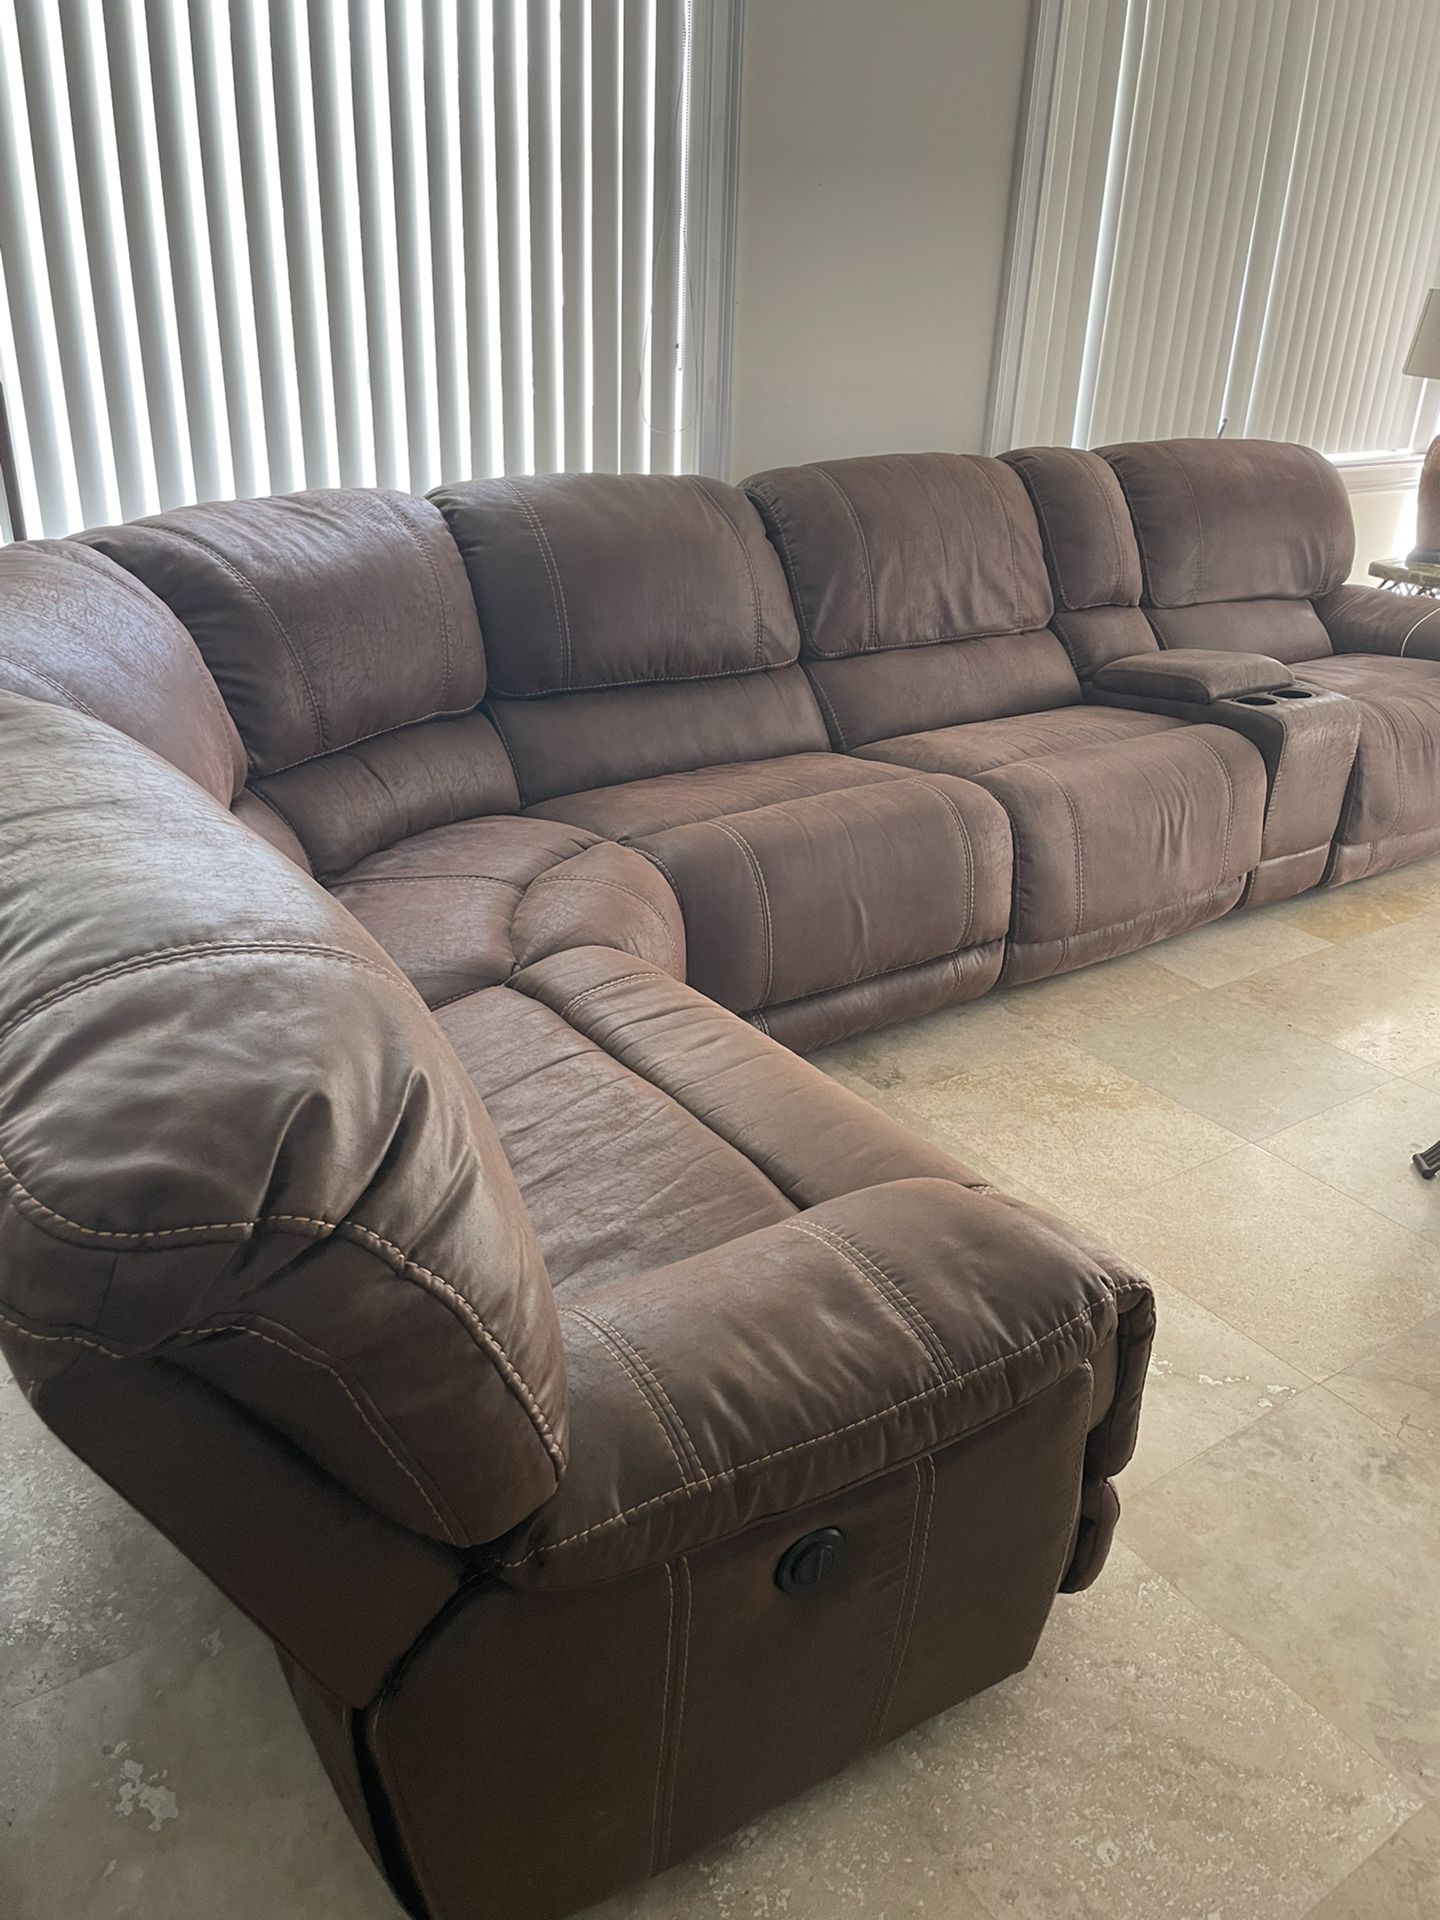 Furniture For Sale- Must Sell